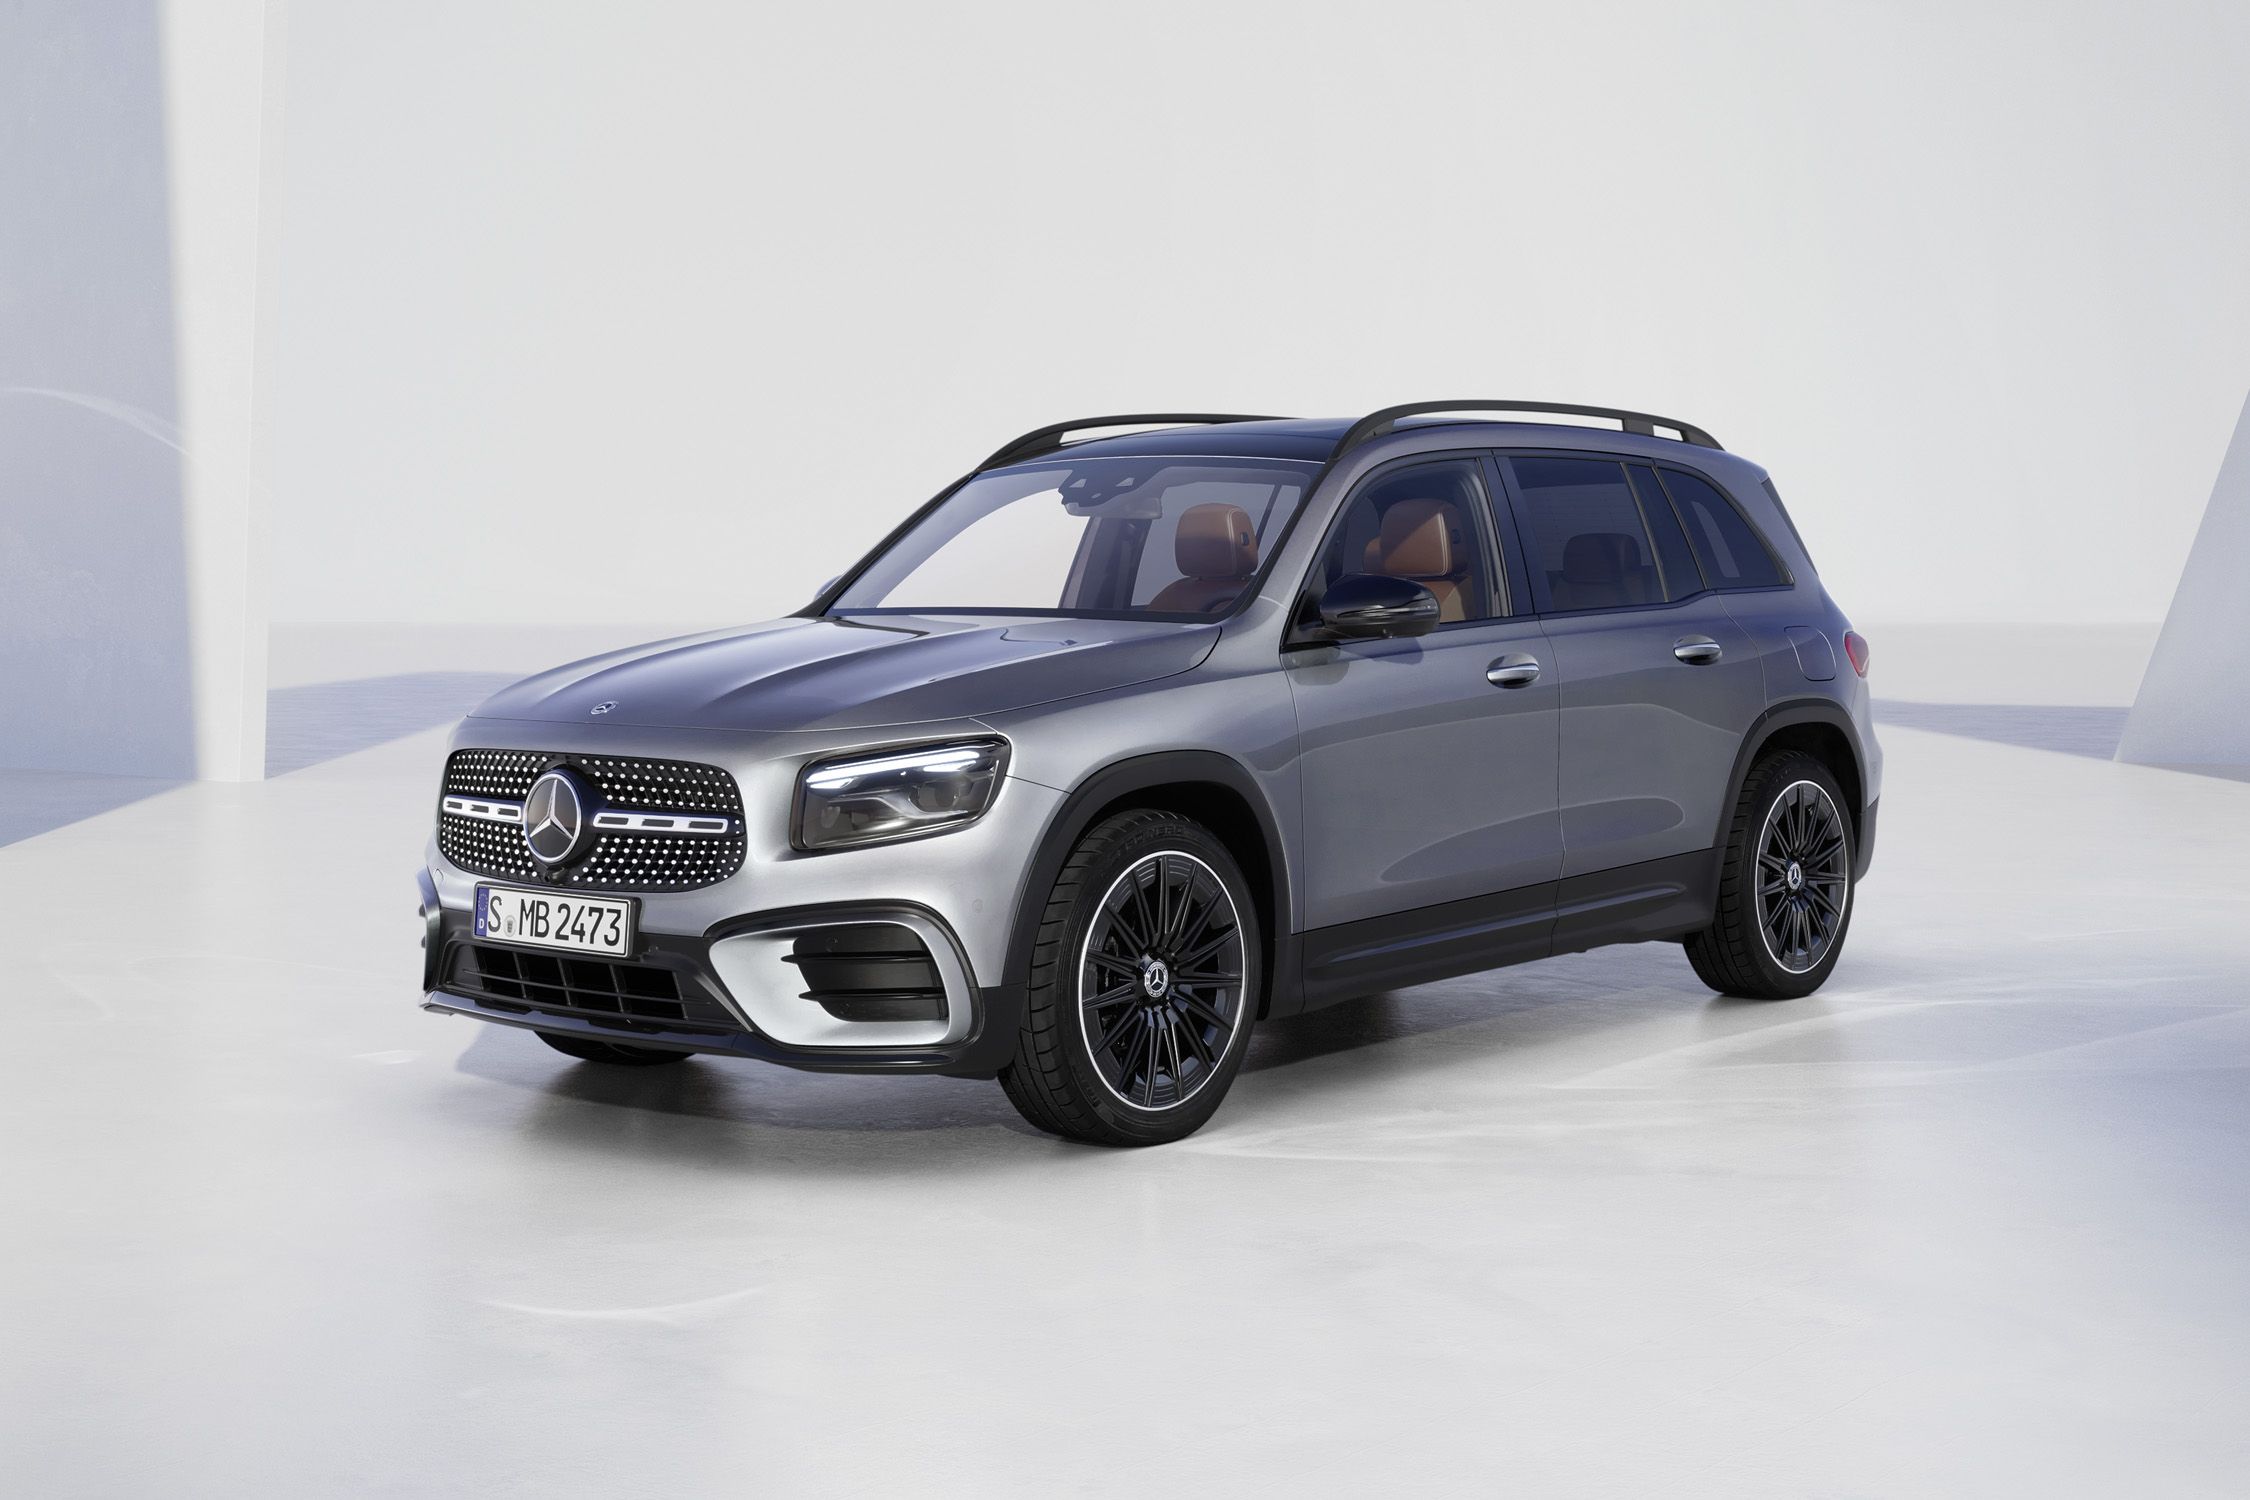 2020 Mercedes GLA 220d review: revised SUV guns for Audi and BMW rivals